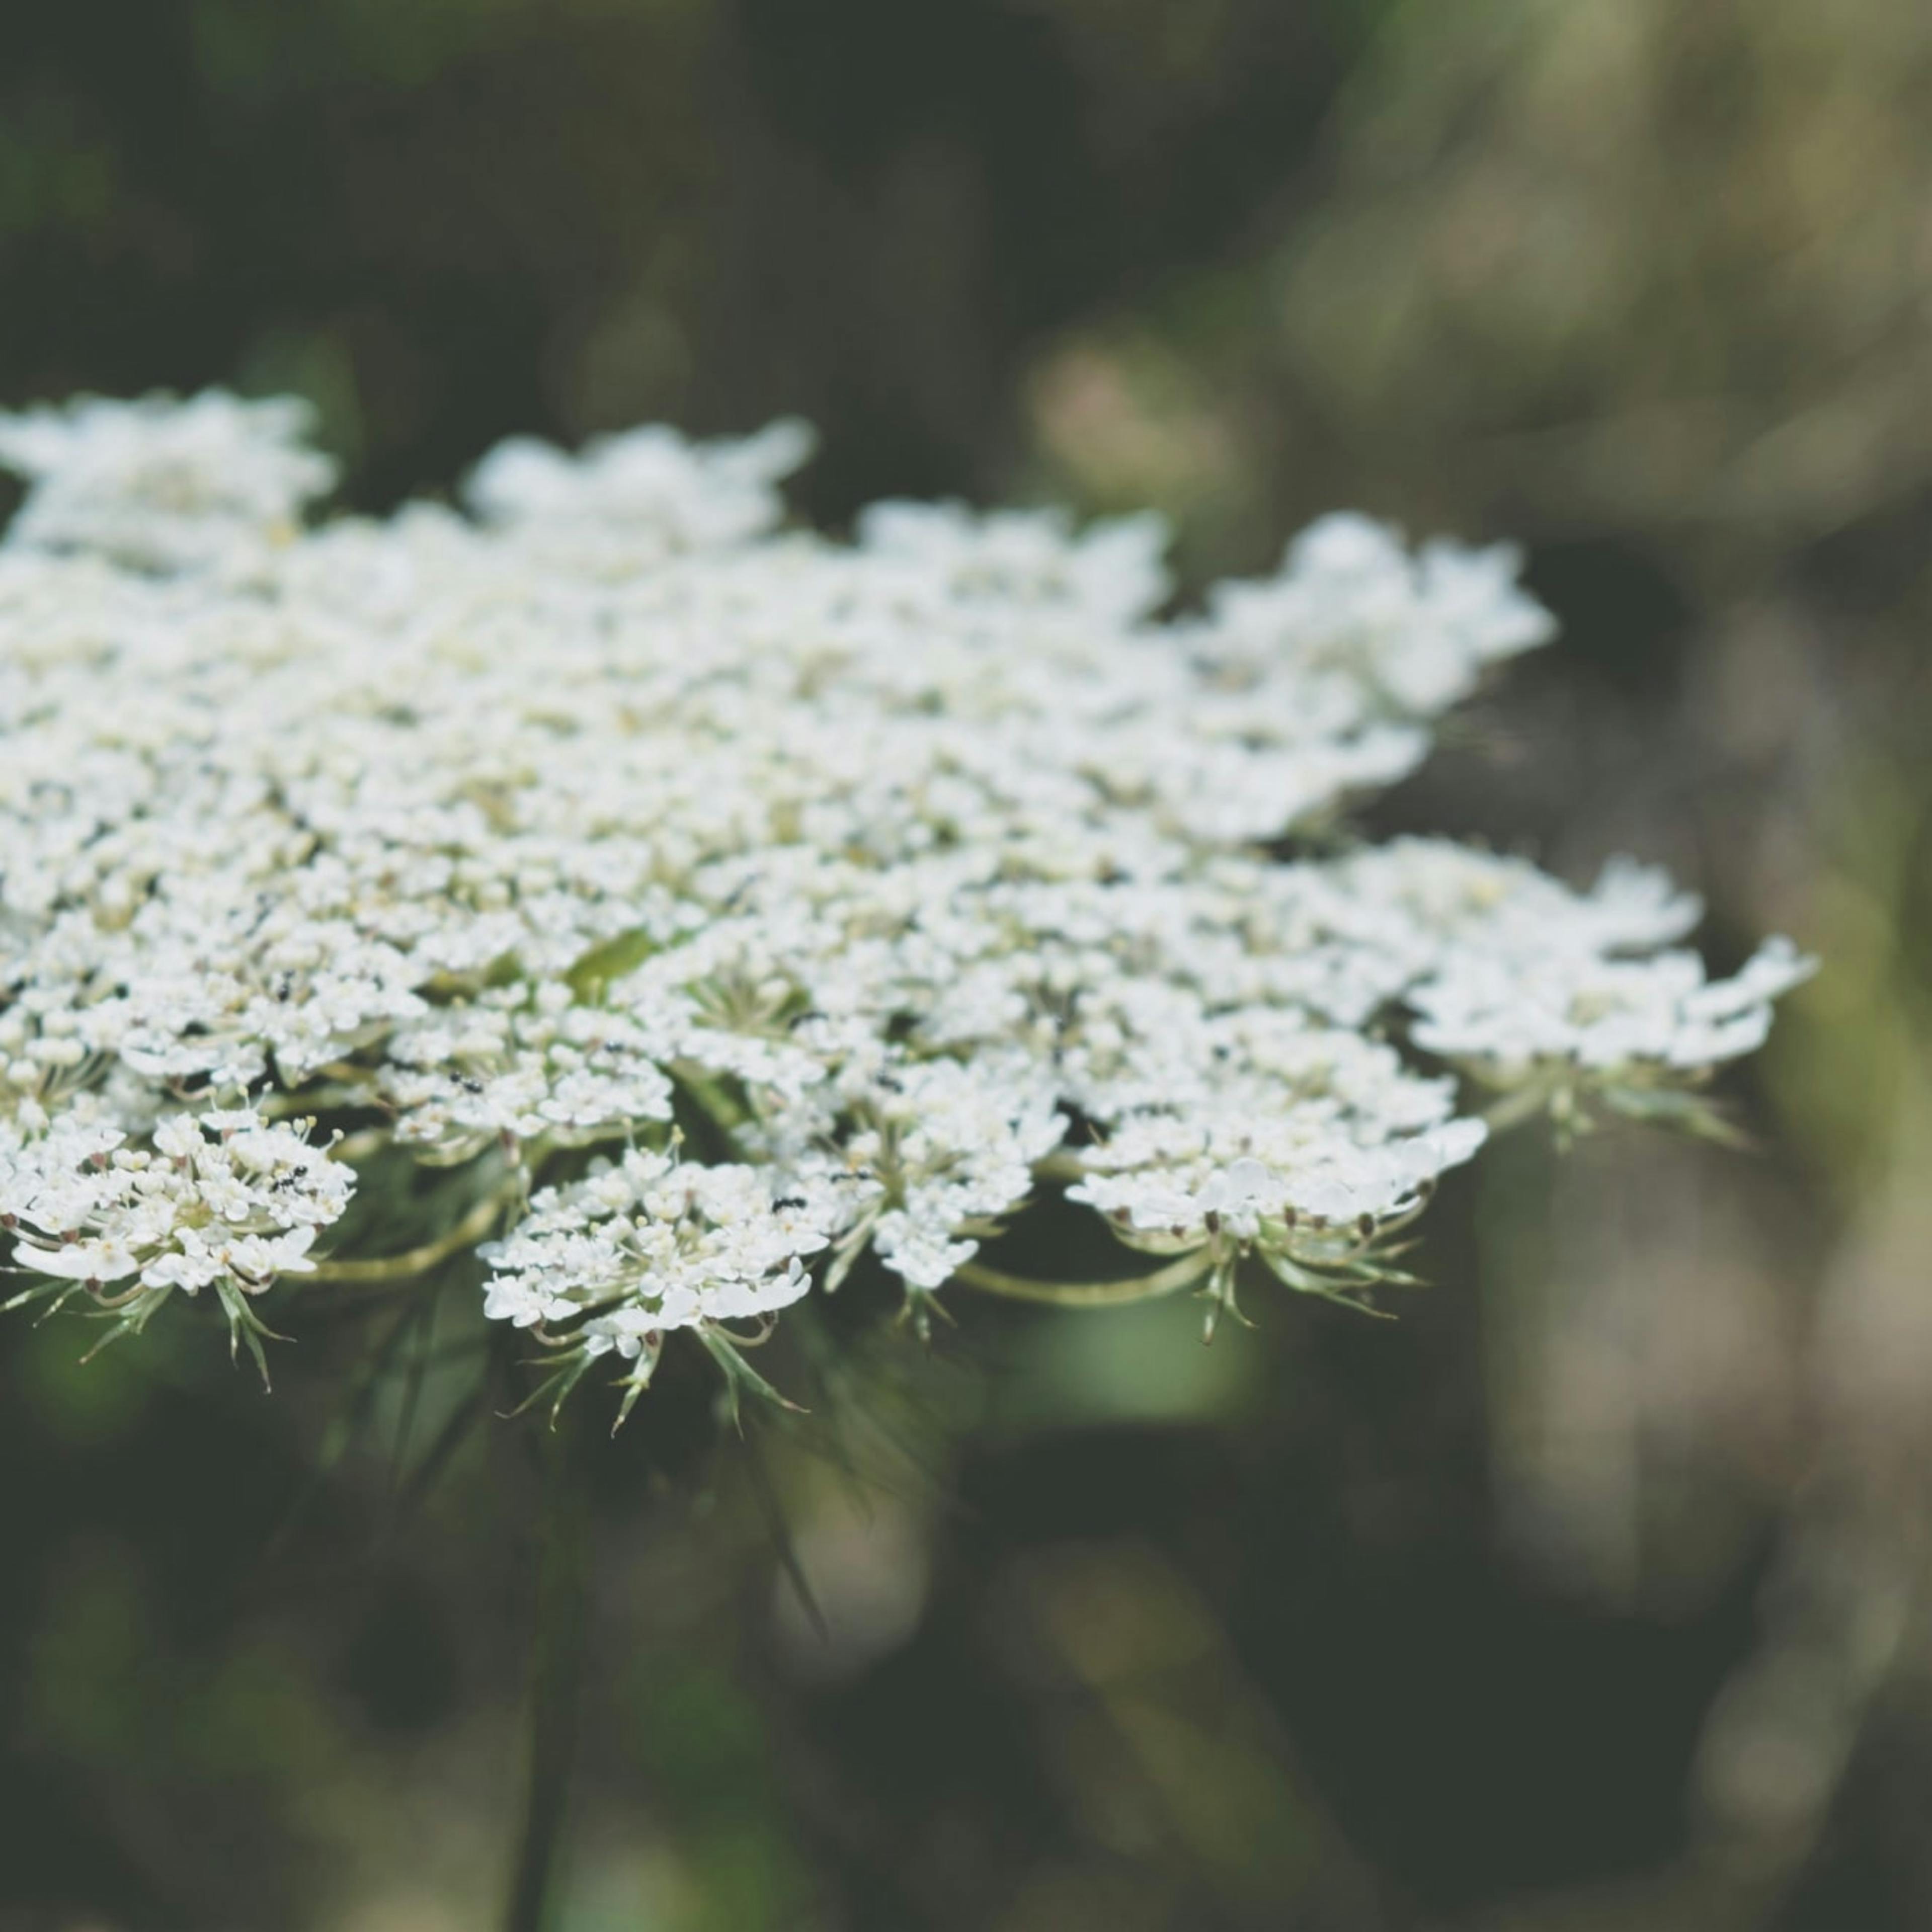 Queen Anne's Lace is an ancient herbal remedy for unwanted pregnancy.